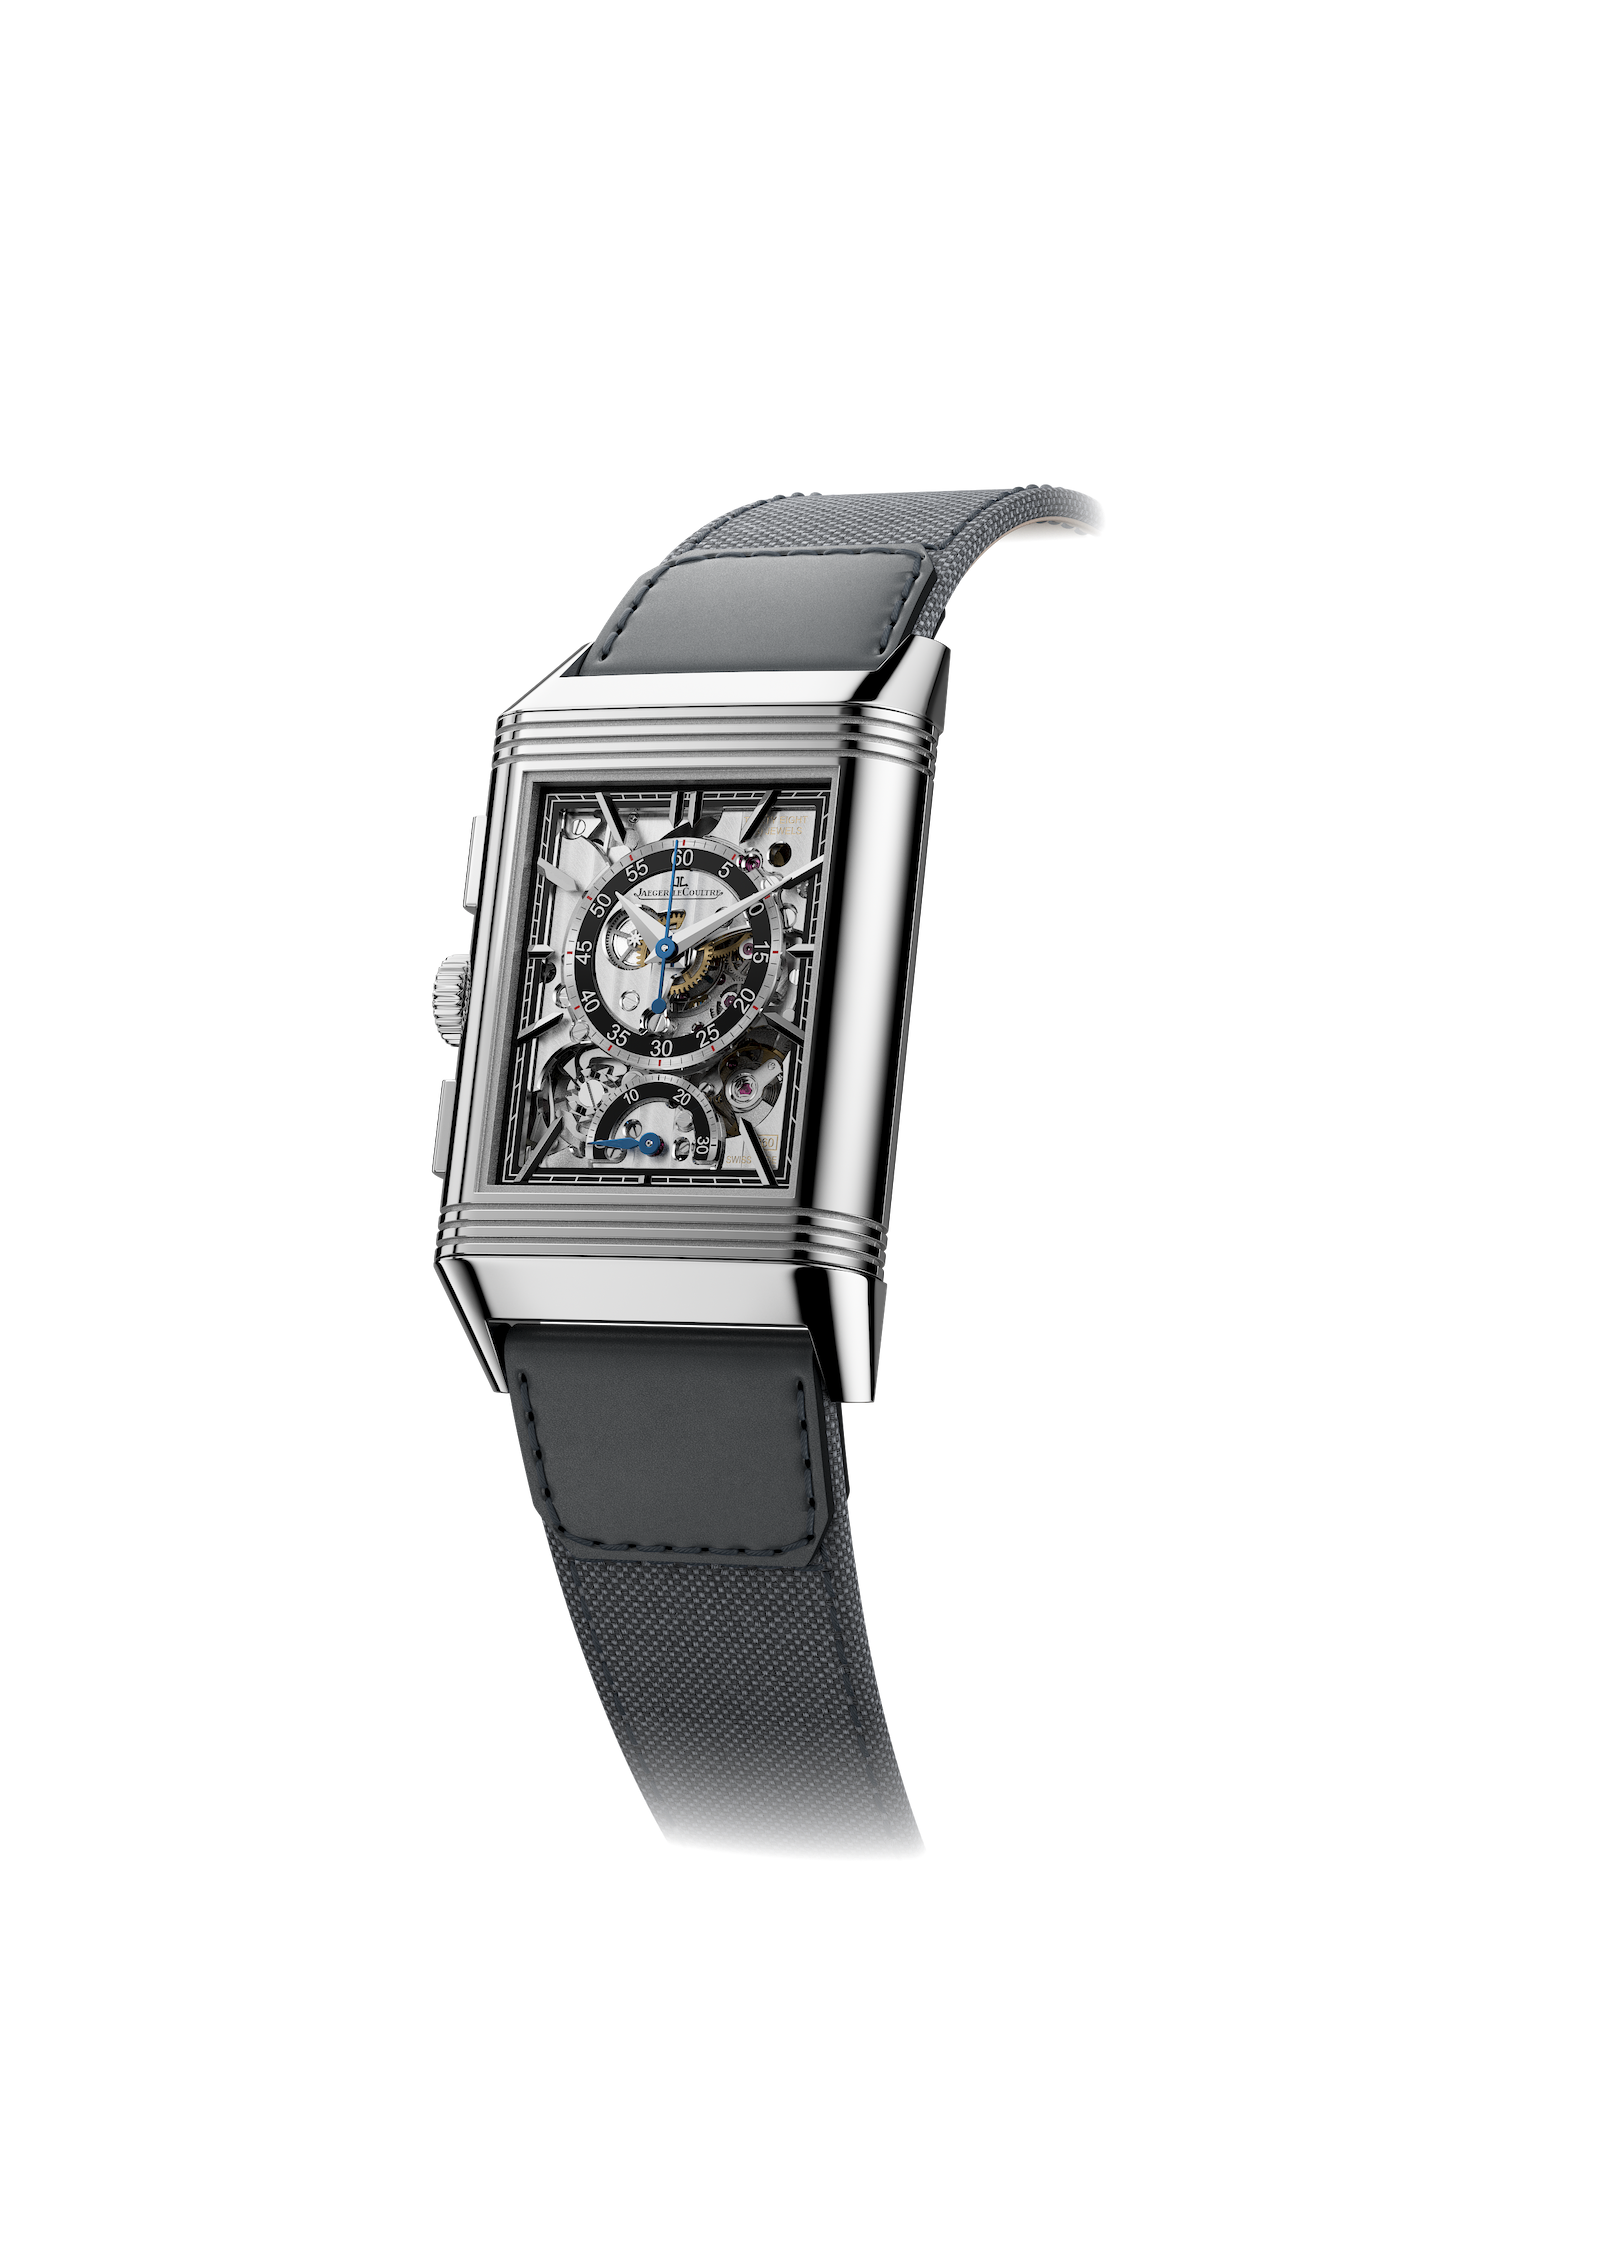 Jaeger-LeCoultre Reverso Tribute Chronograph unveiled at Watches & Wonders Geneva 2023.